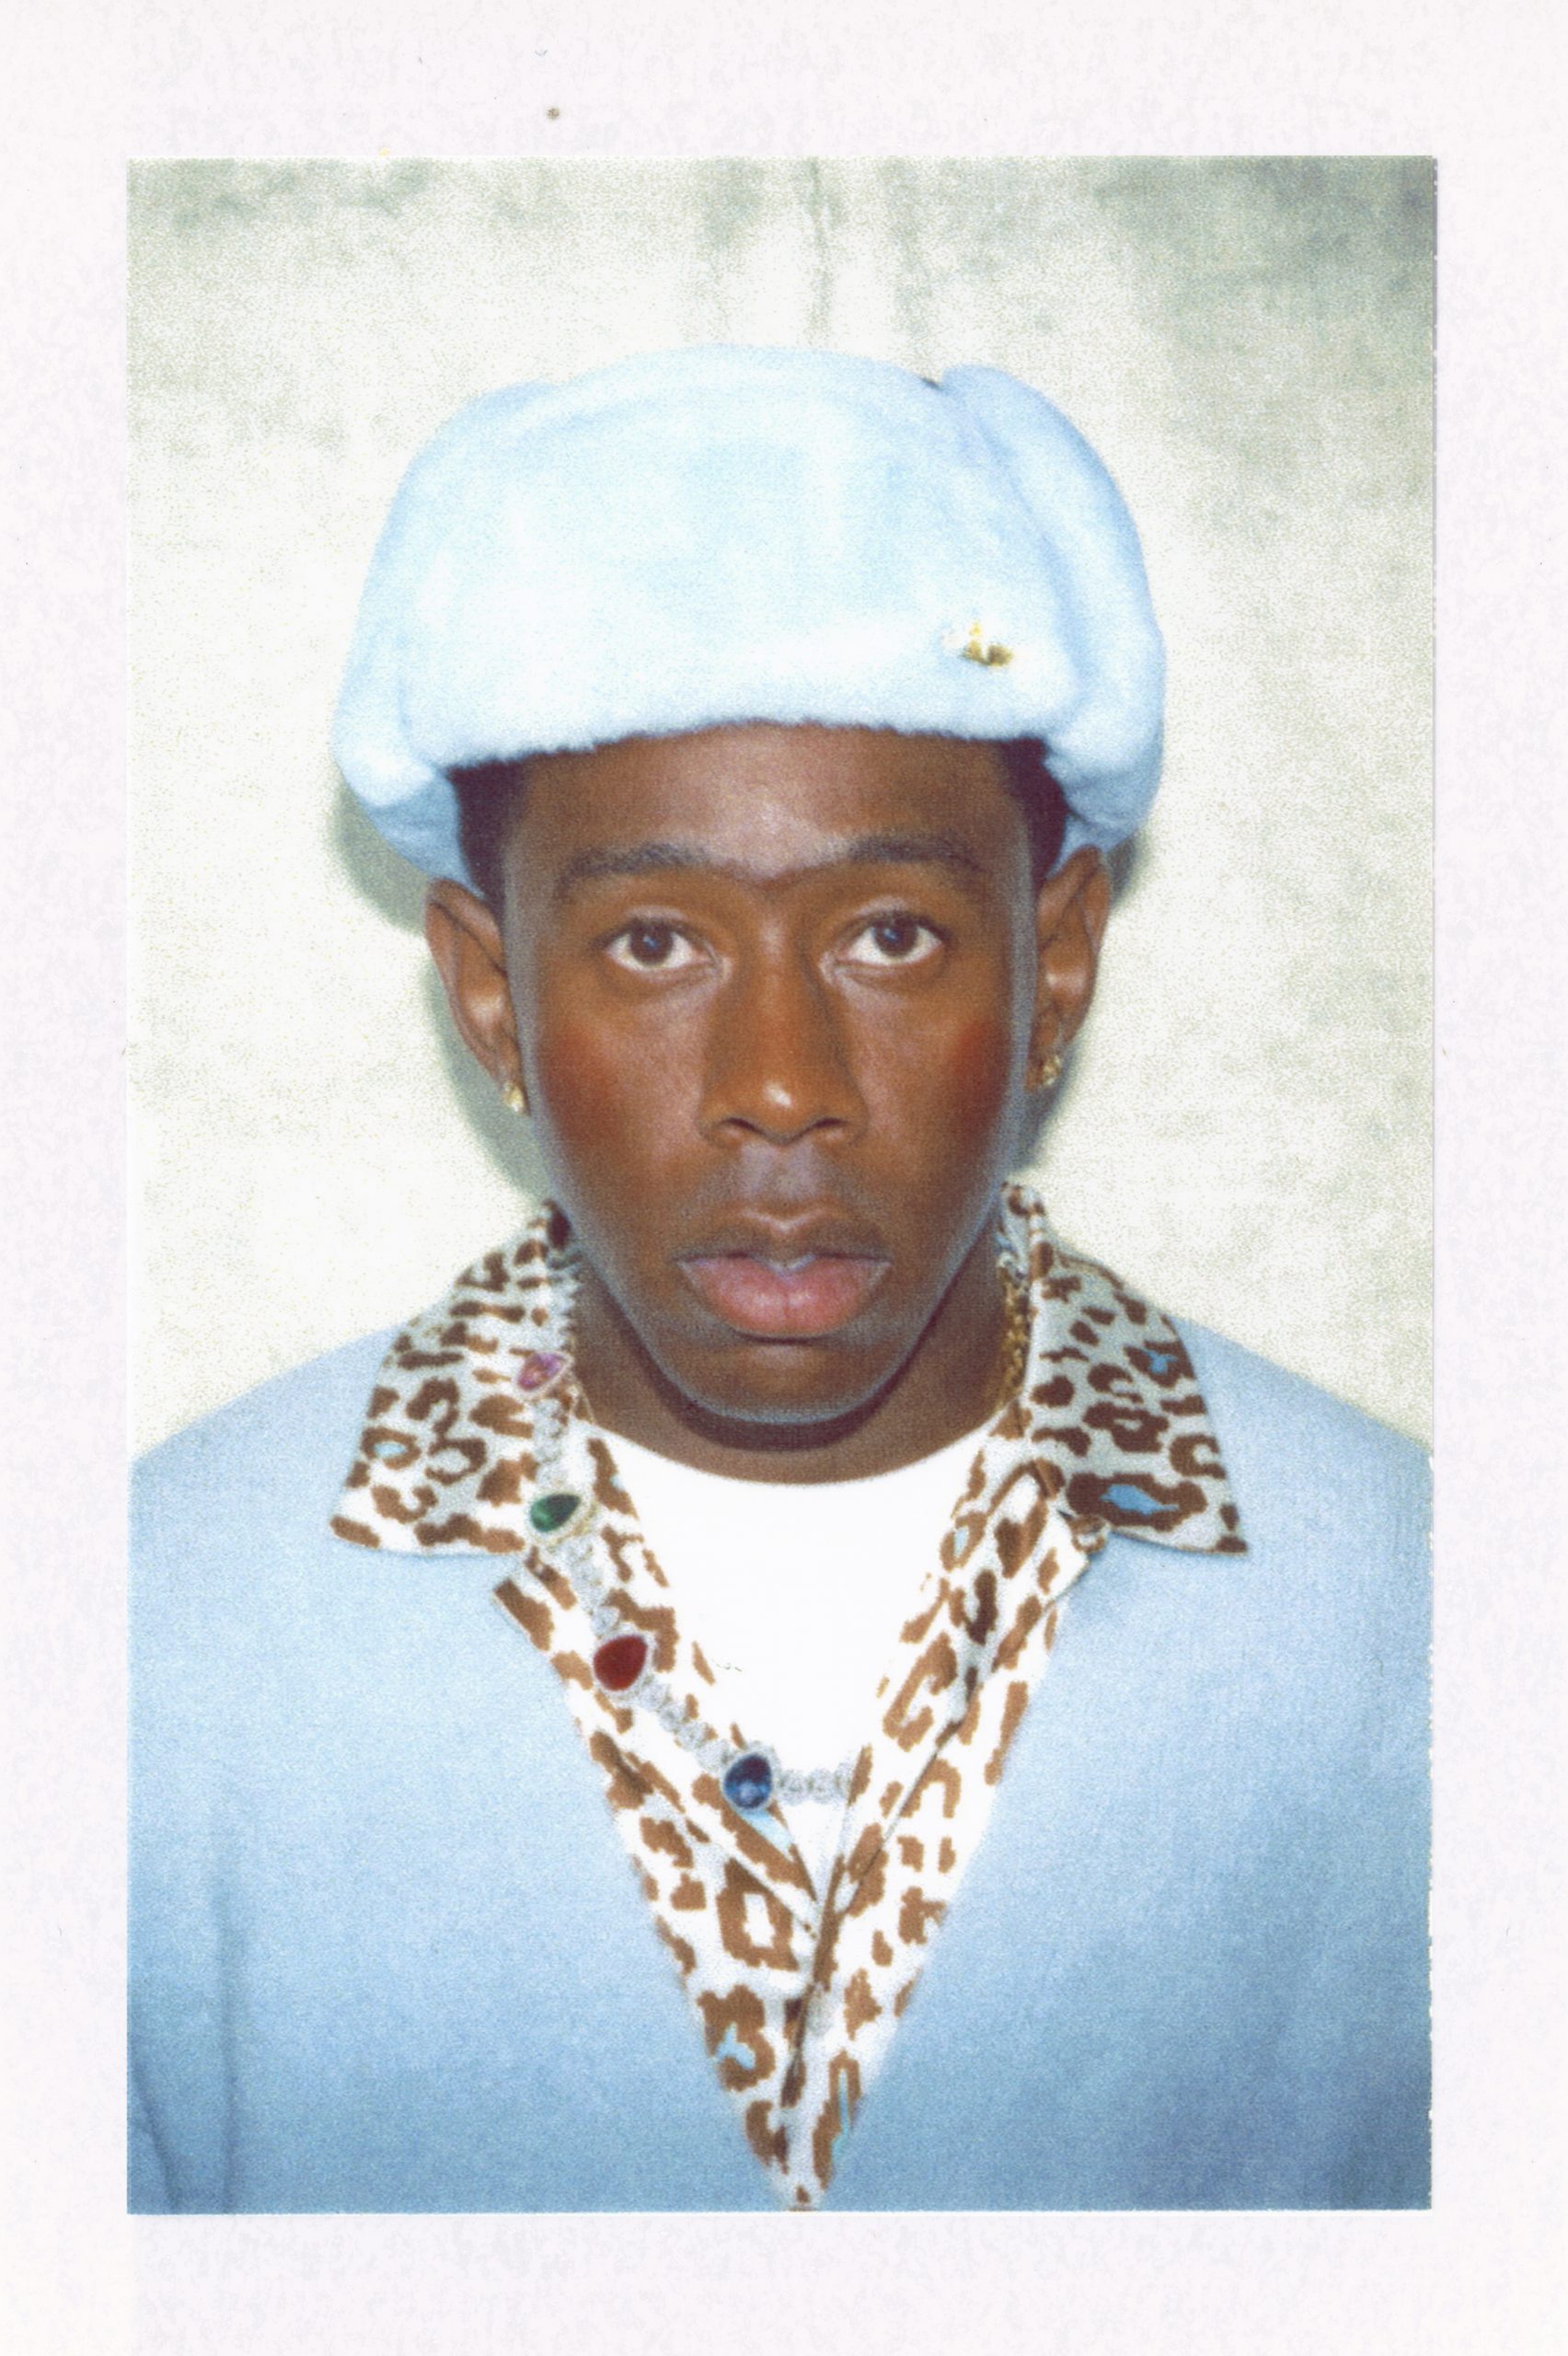 Tyler, The Creator Drops Deluxe Edition of 'Call Me If You Get